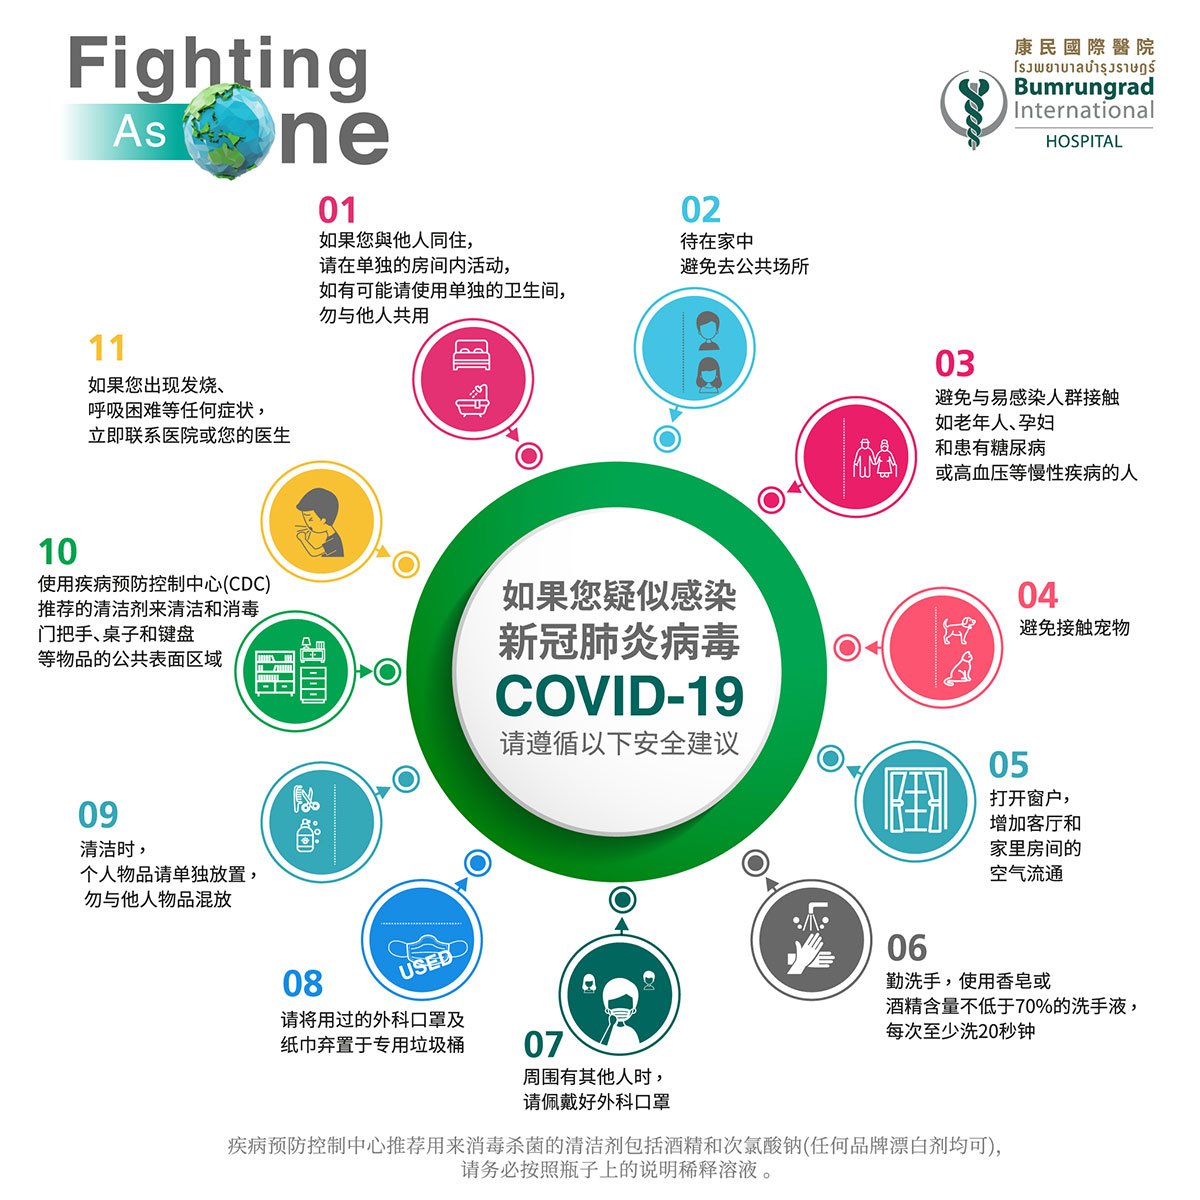 Website_Safety-advice-if-you-suspect-covid-19-infection_CN.jpg